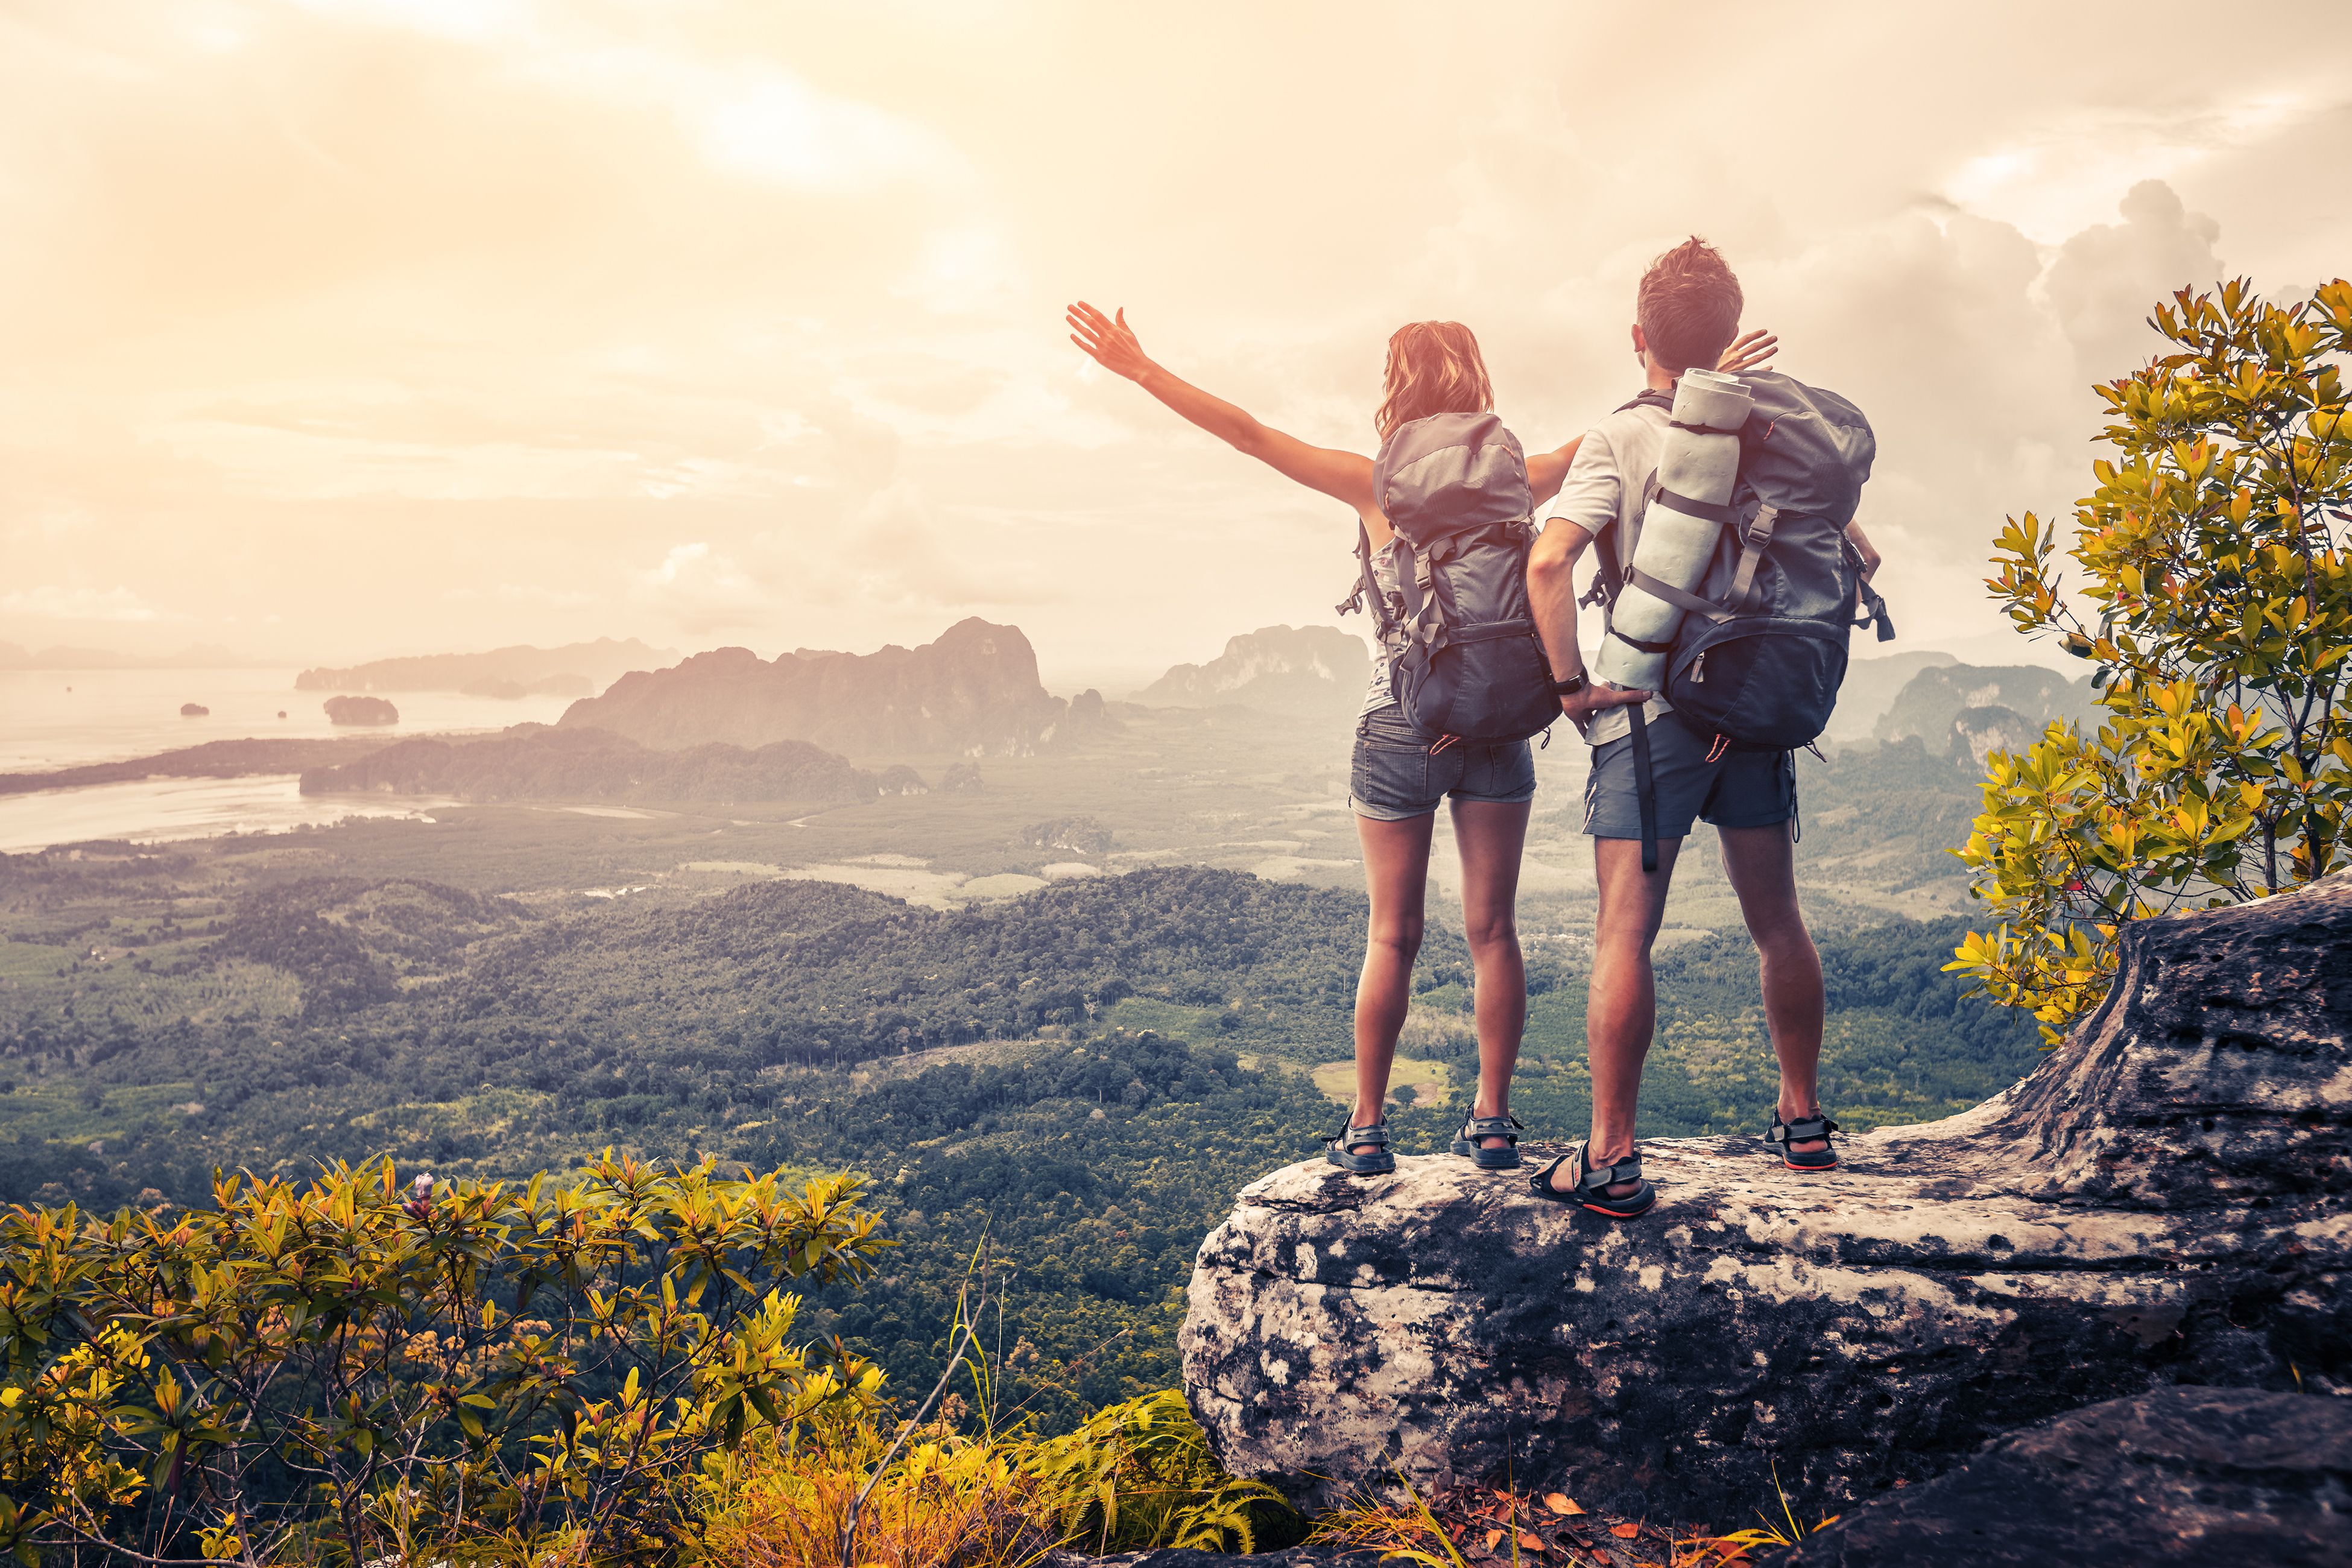 A couple climb a mountain and bask under the sunlight. | Source: Shutterstock